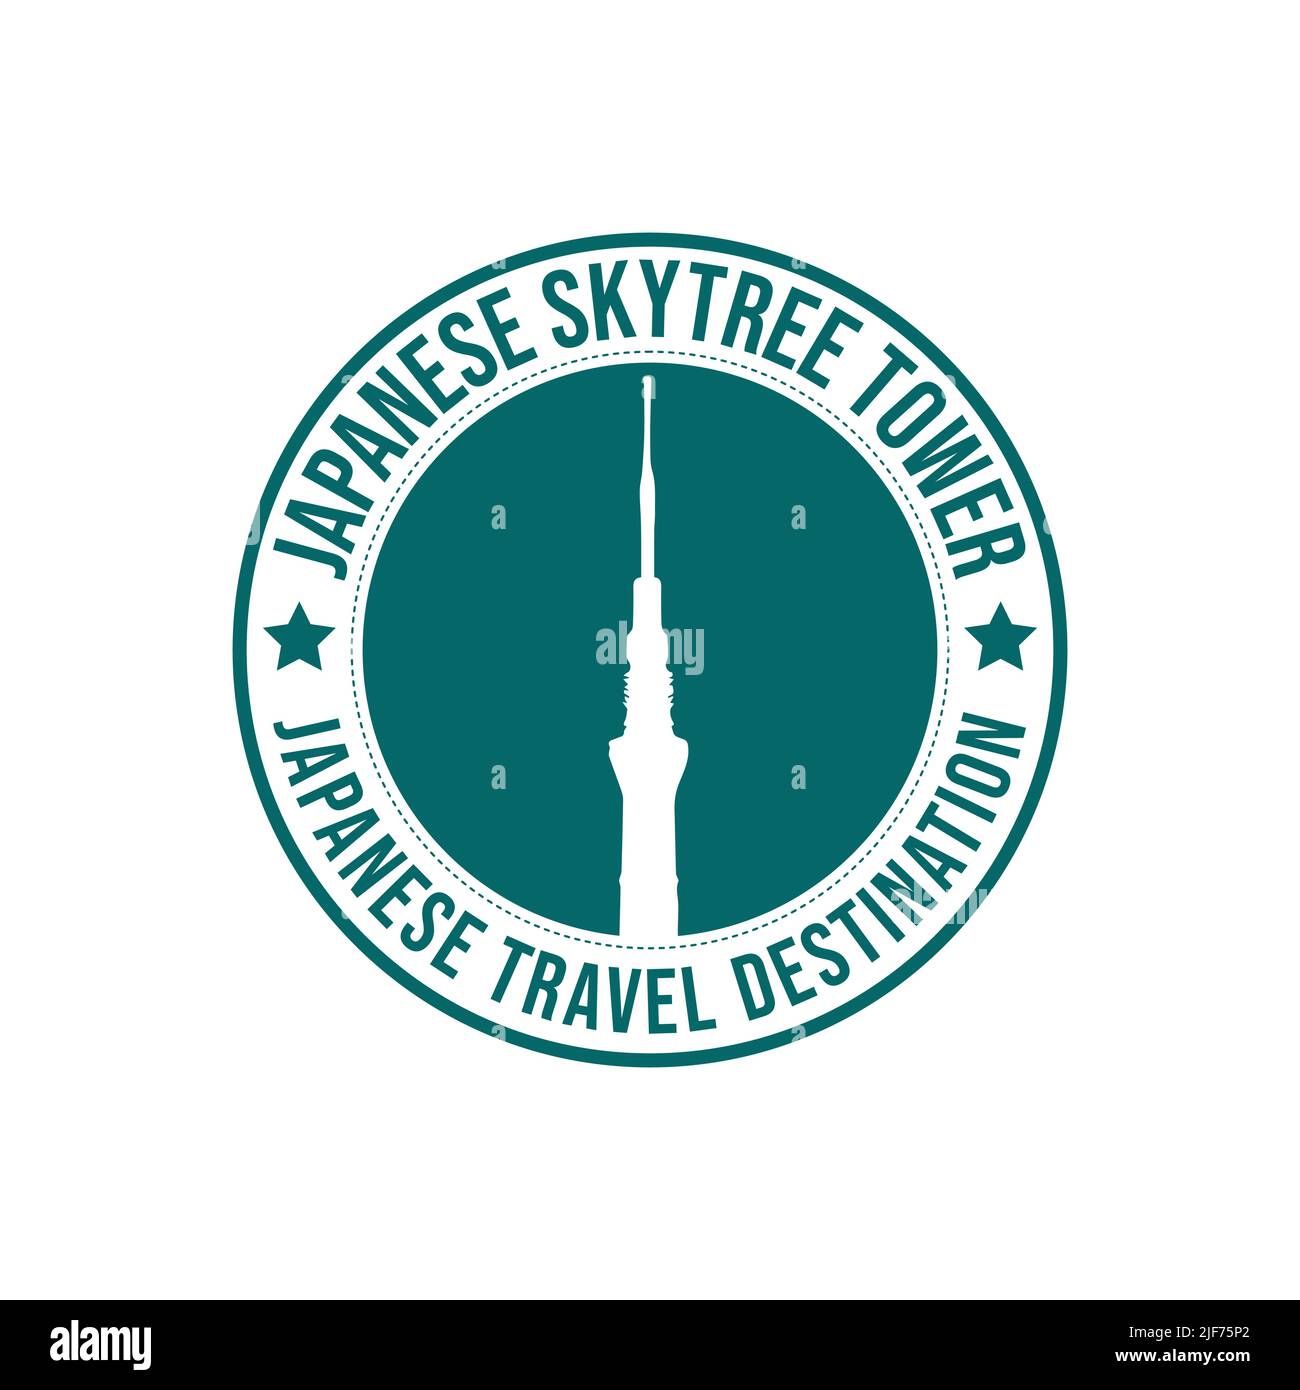 Circle rubber stamp with the Japanese skytree tower travel destination written inside the stamp. Japanese modern tower architecture. Japanese travel d Stock Vector